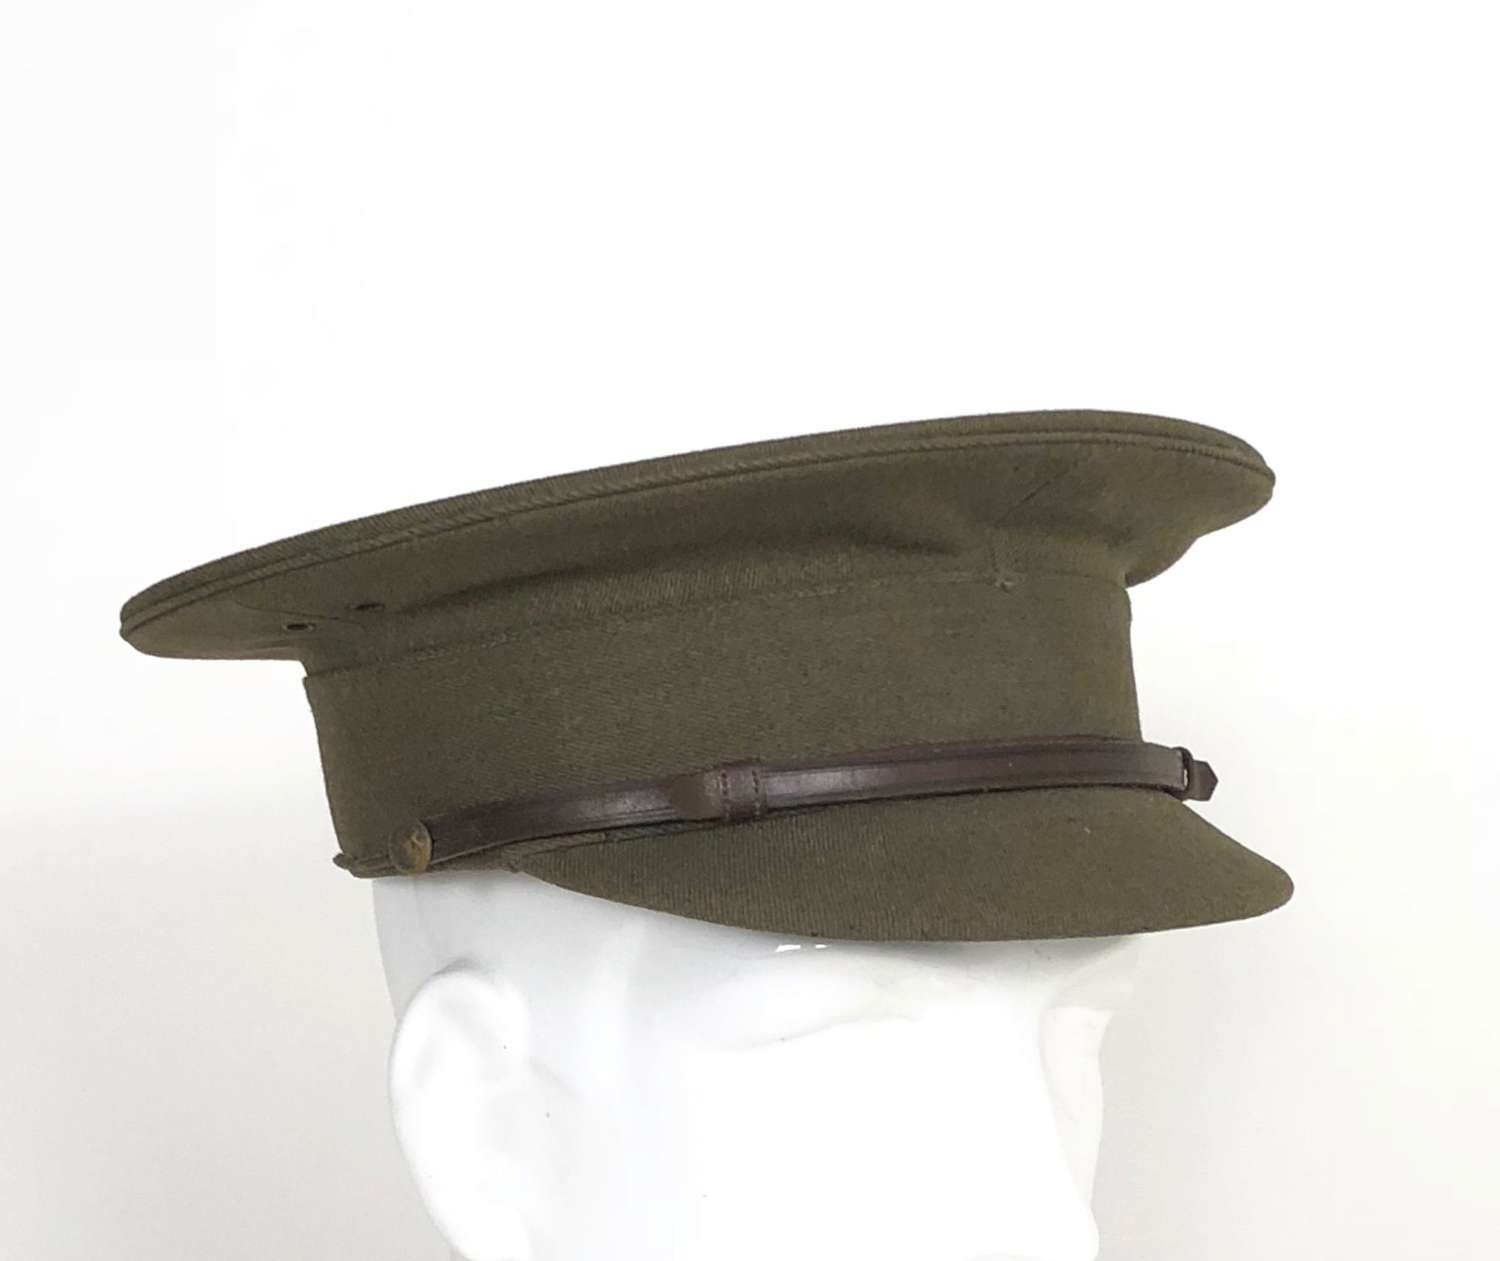 WW1 Pattern Army Officer’s Issue Cap.